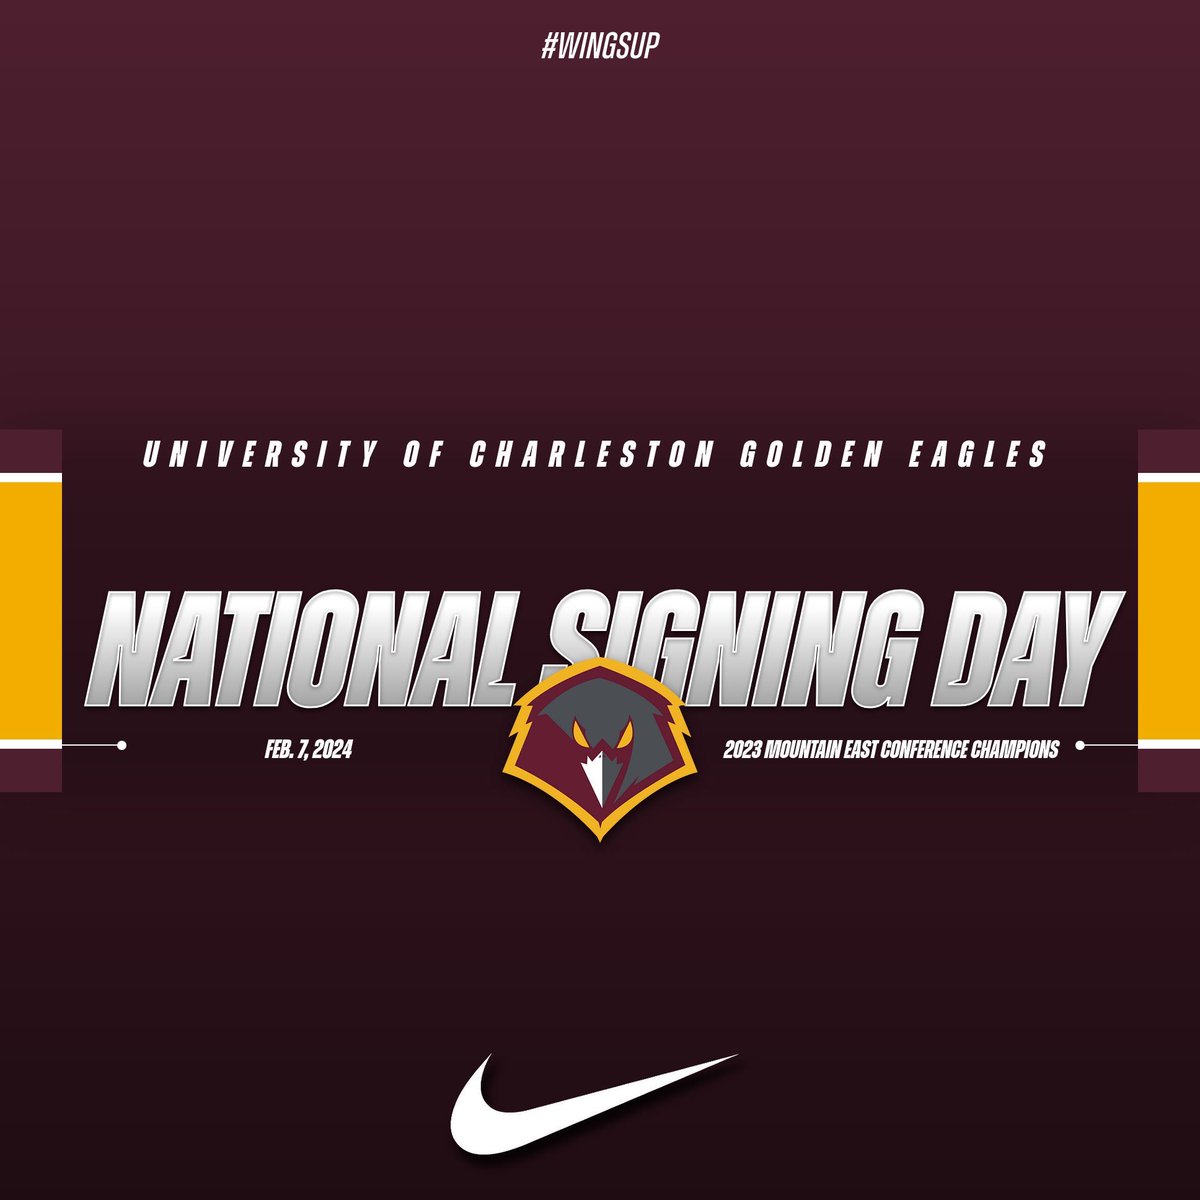 Happy National Signing Day to all 2024 ballers who will be finalizing some big decisions today! We are excited about the ‘24 class that will help push this team to even larger heights in the upcoming season. Come toUCdown in Chucktown. Wings Up 🦅